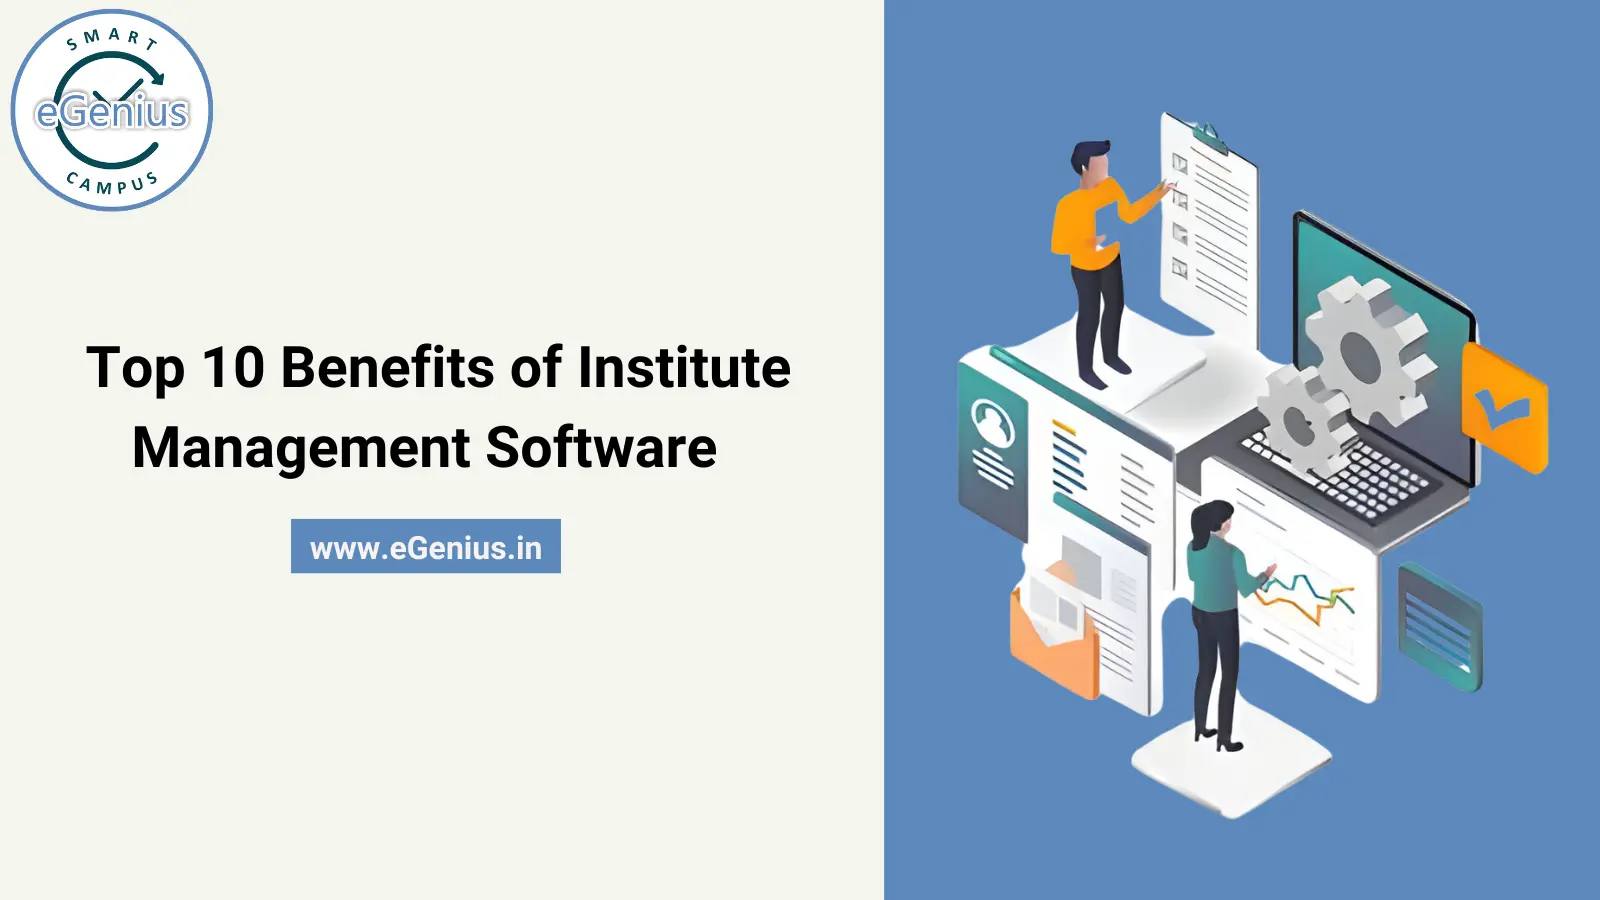 Top 10 Benefits of Institute Management Software.